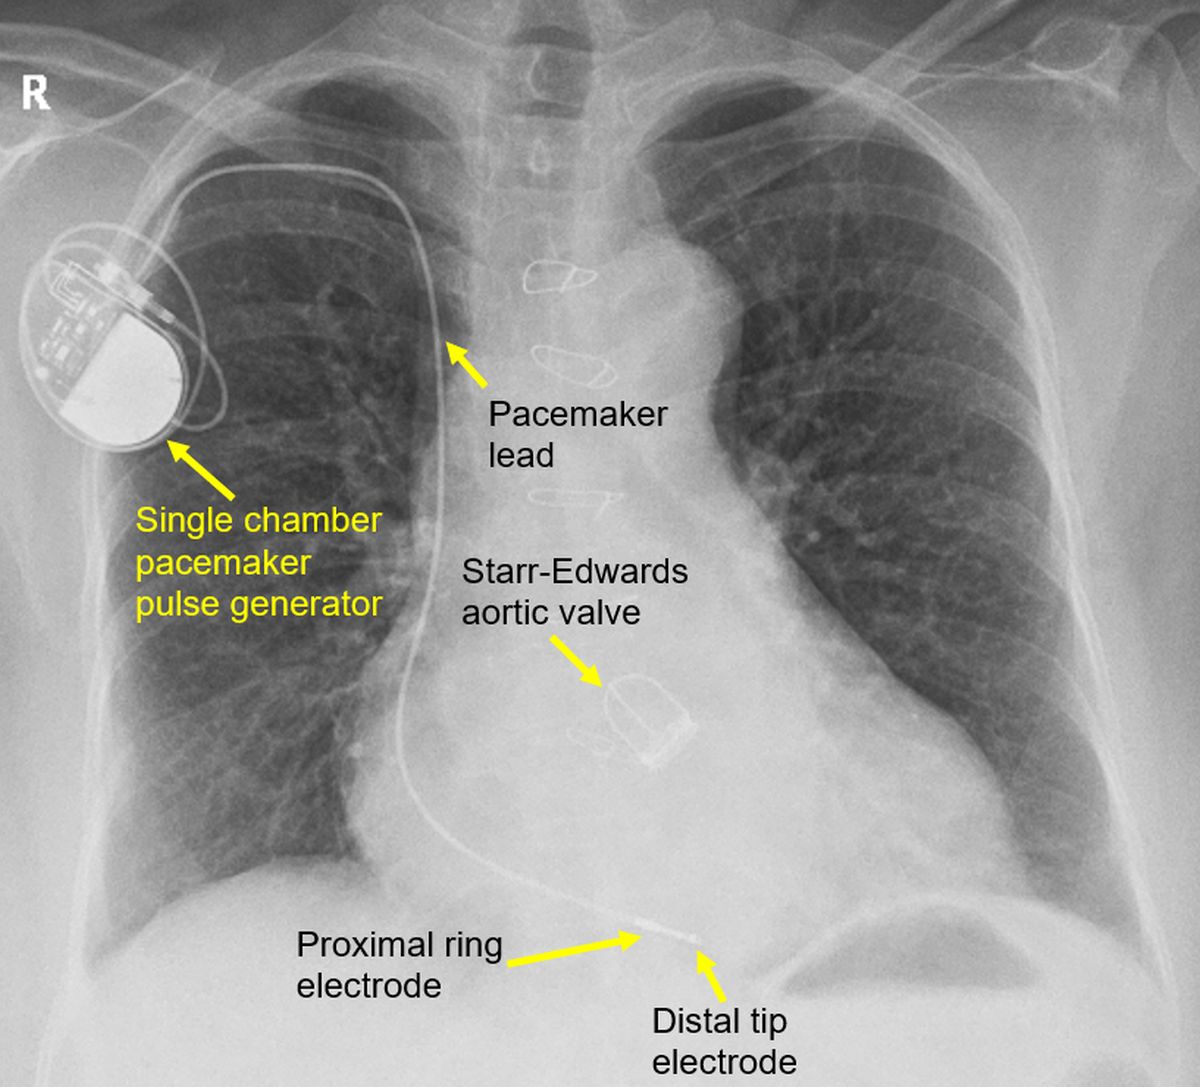 Single chamber pacemaker and aortic prosthetic valve (SEP).